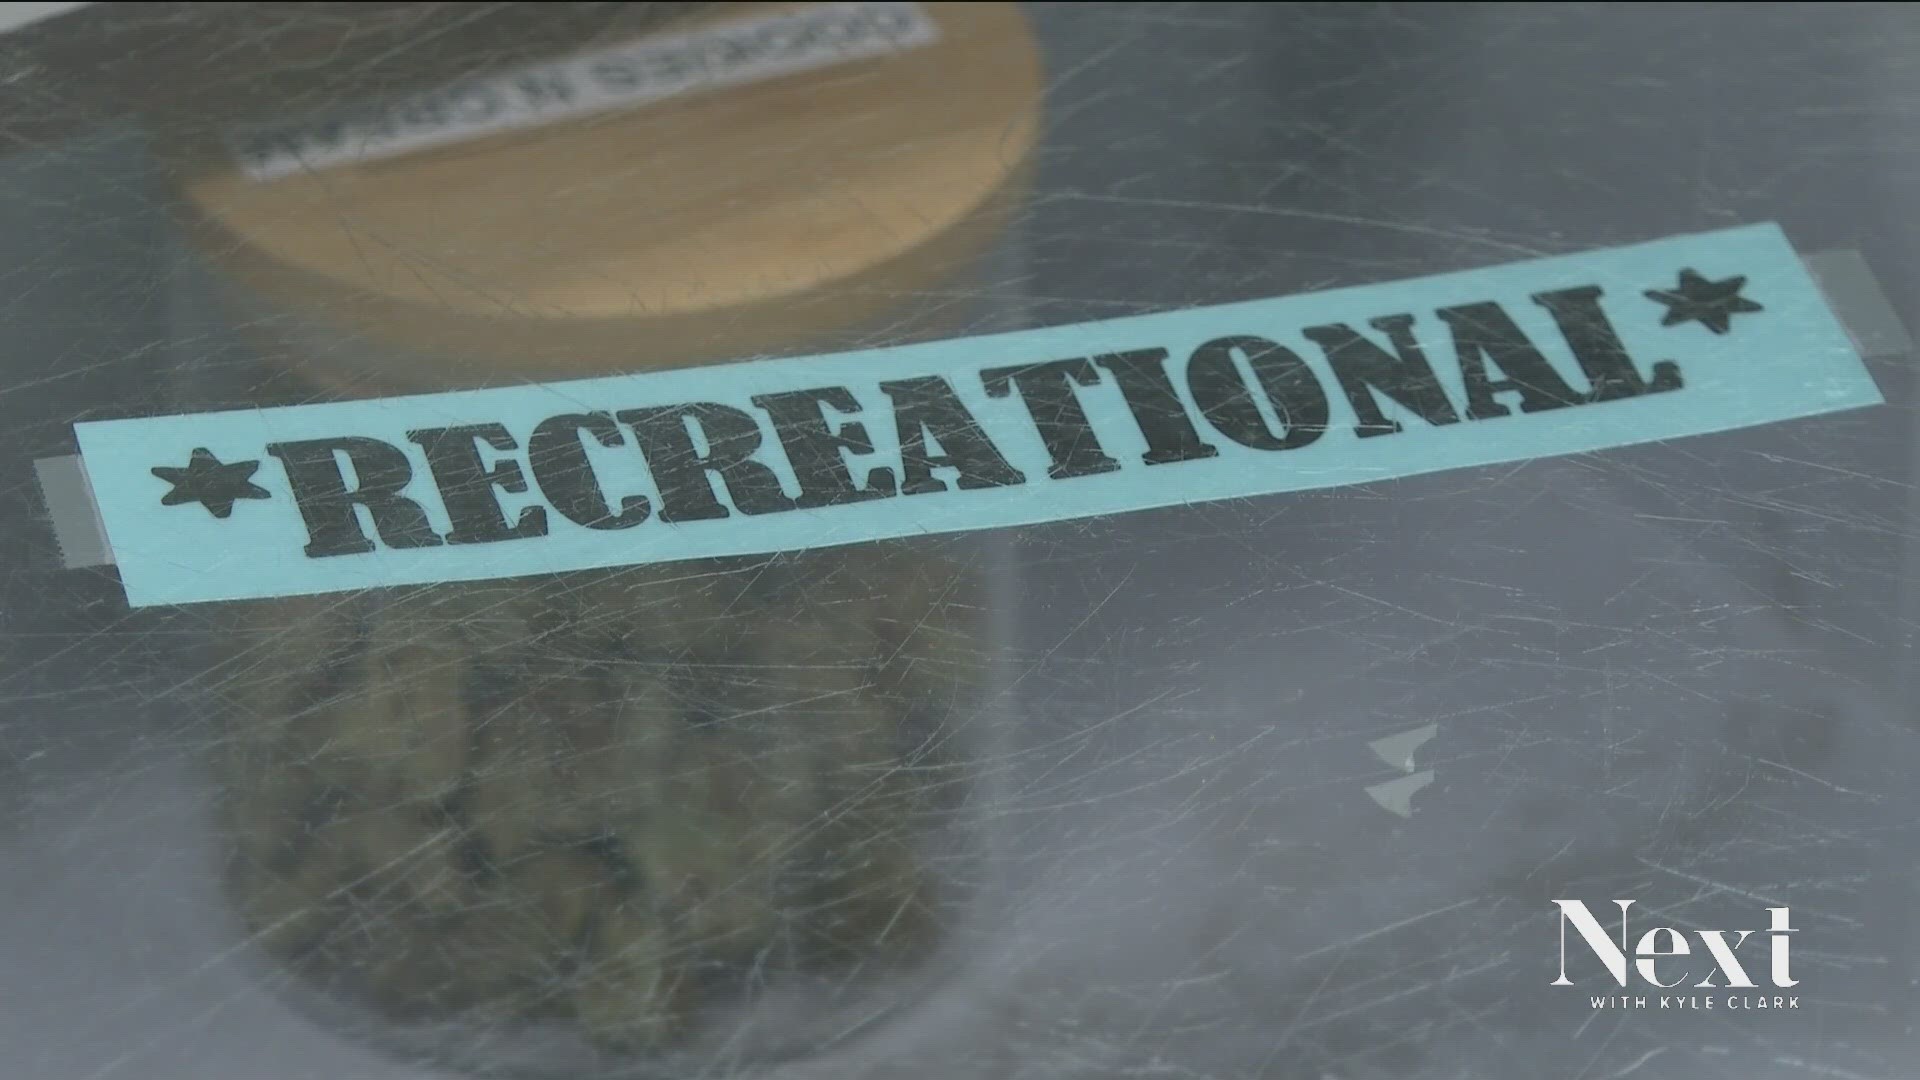 The city has brought in half a billion dollars so the first recreational marijuana sale on January 1, 2014.